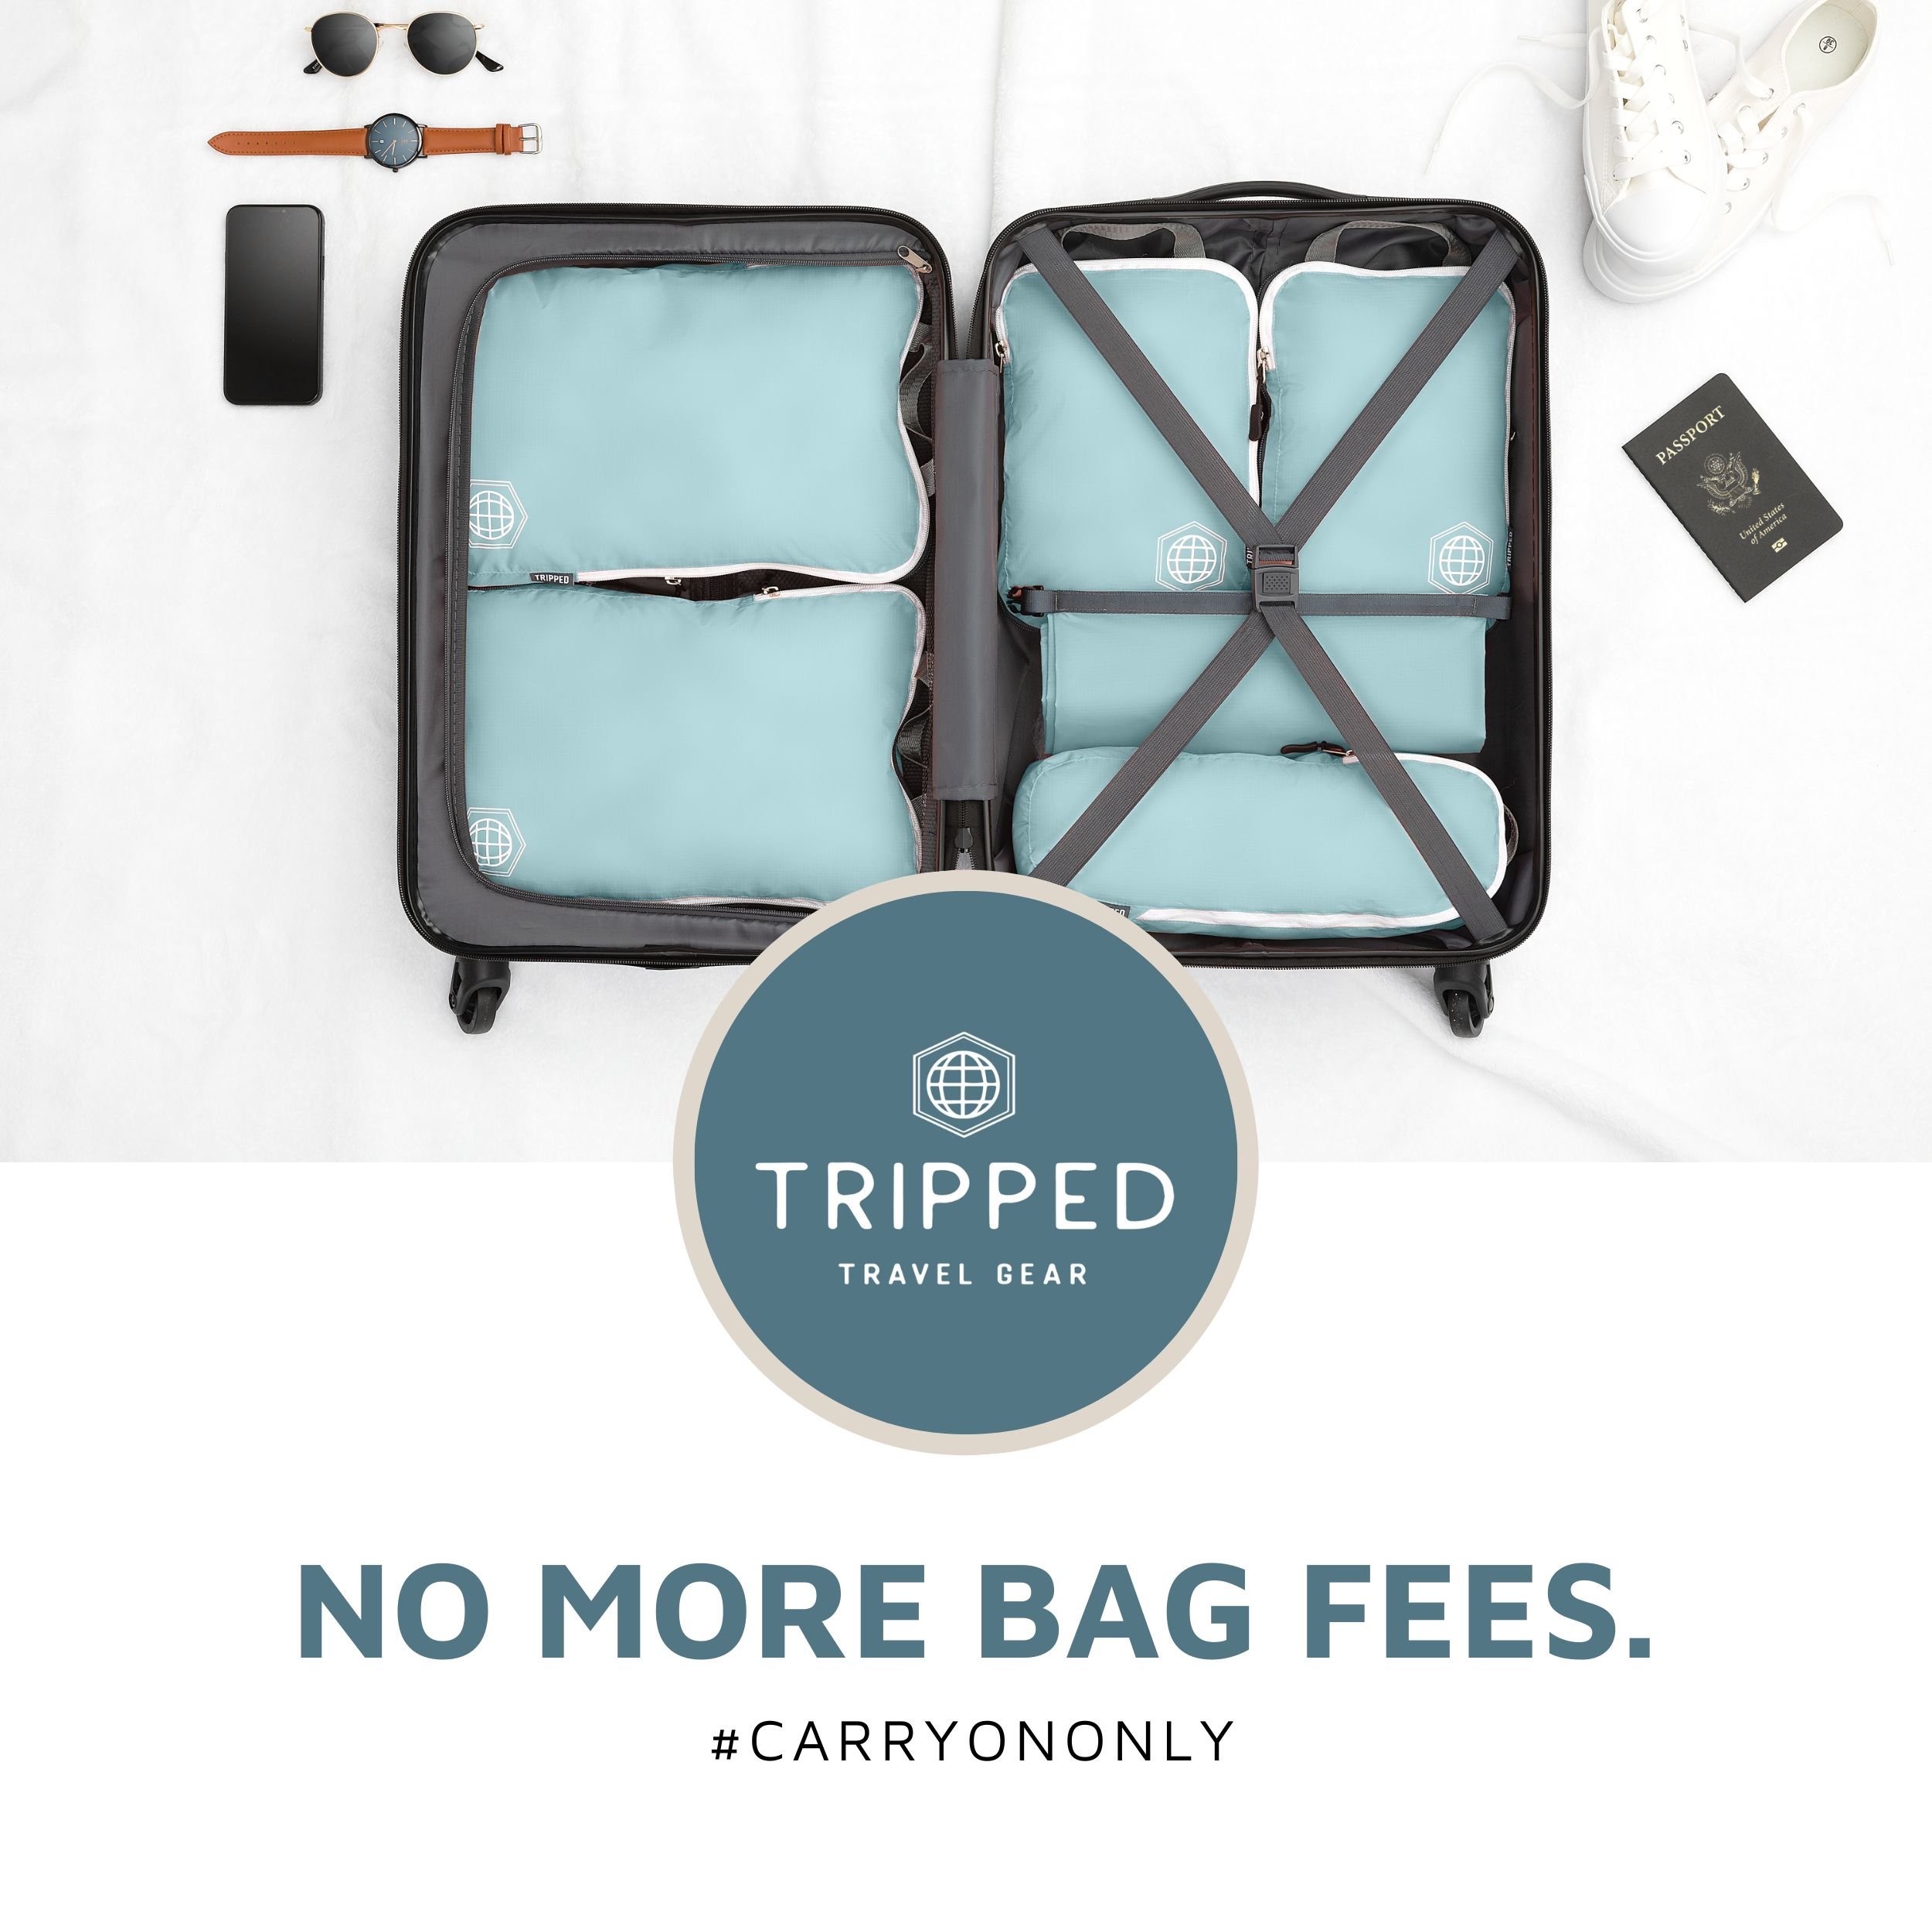 avoid luggage fee with carry on packing cubes teal.jpg